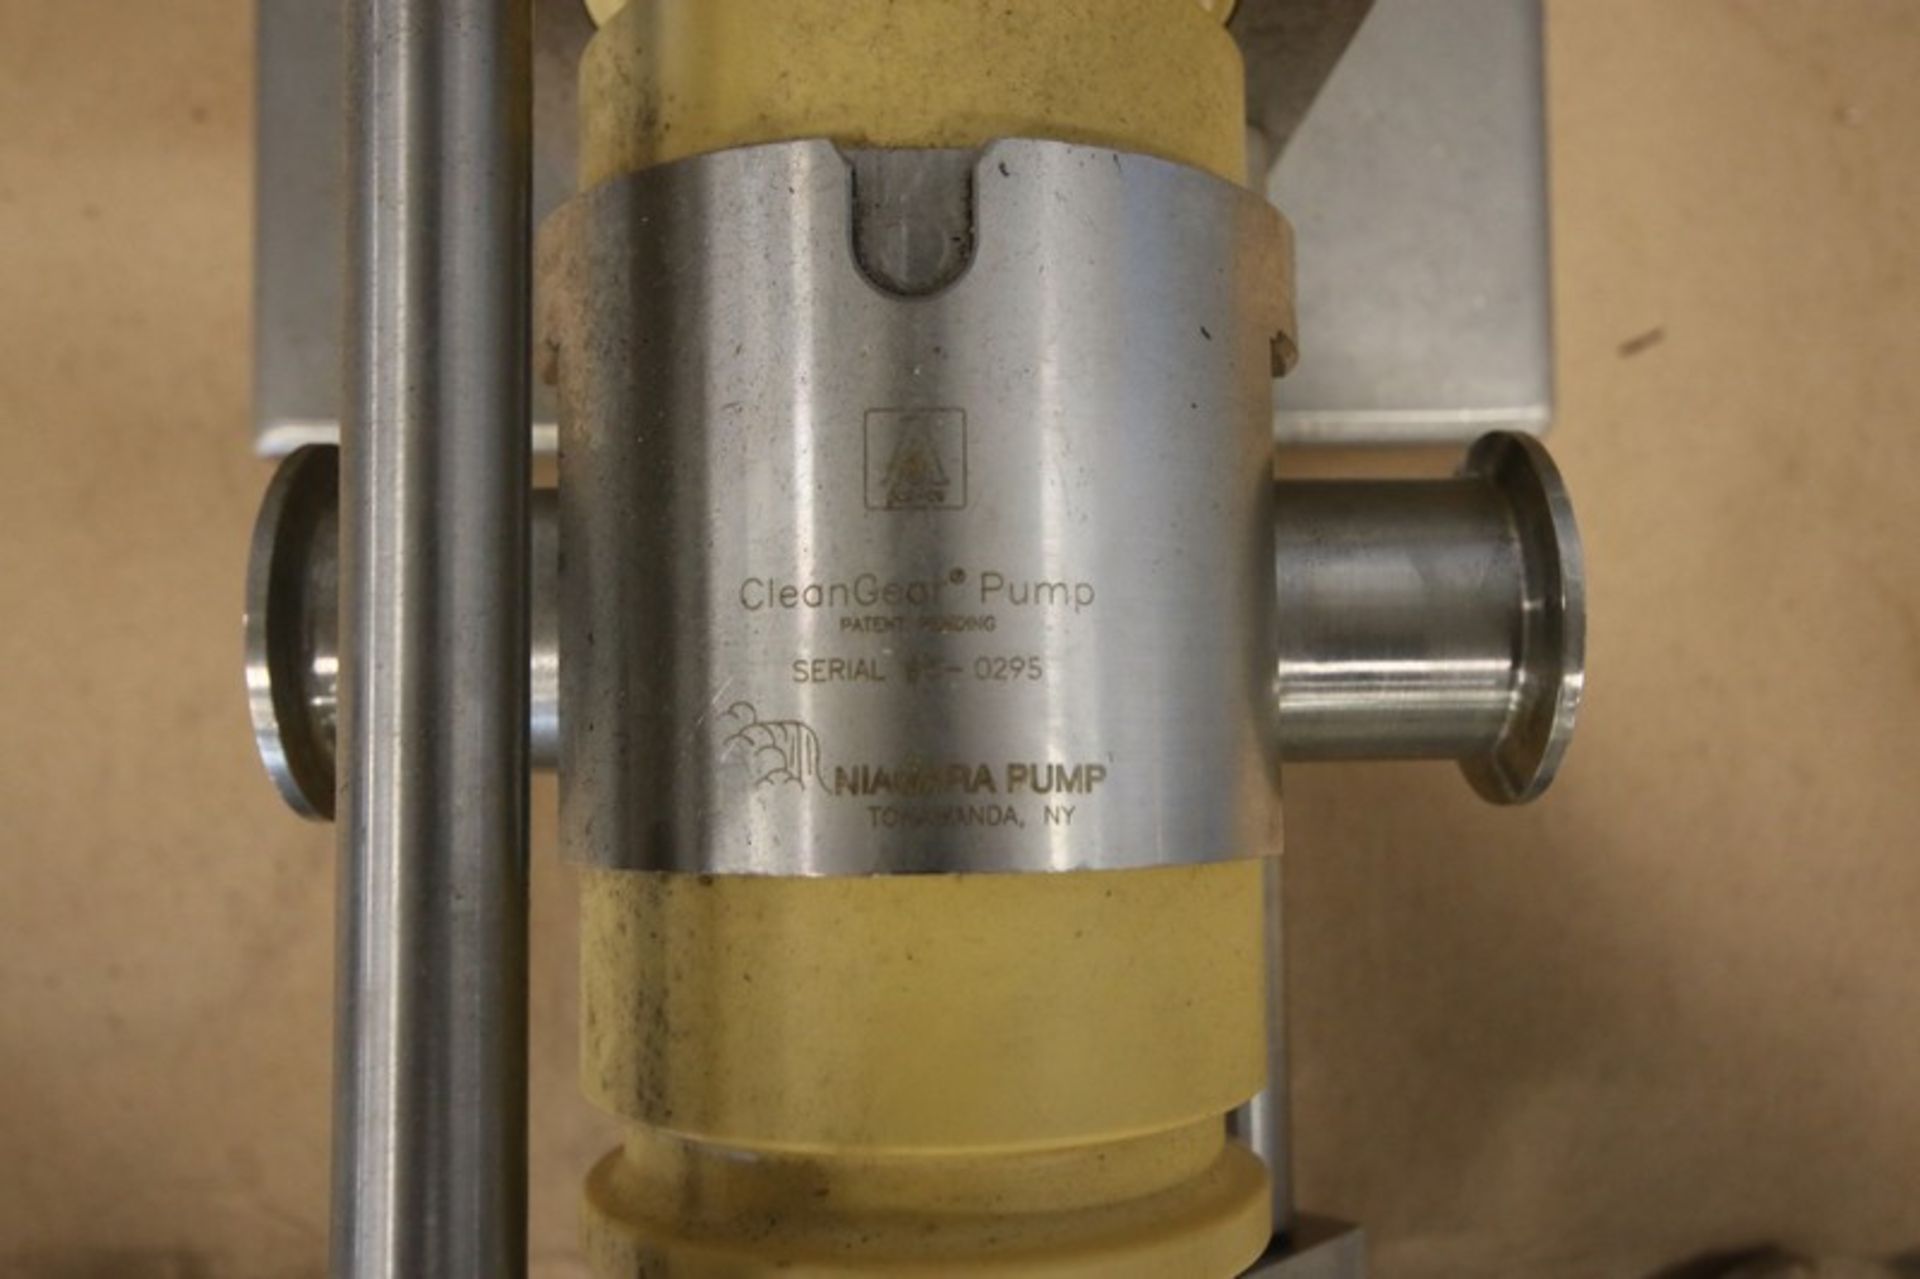 Niagara Pump CleanGear Pump, S/N 6-0295, withPneumatic Internal Controls & Gauges, with Aprox. 2" - Image 5 of 10